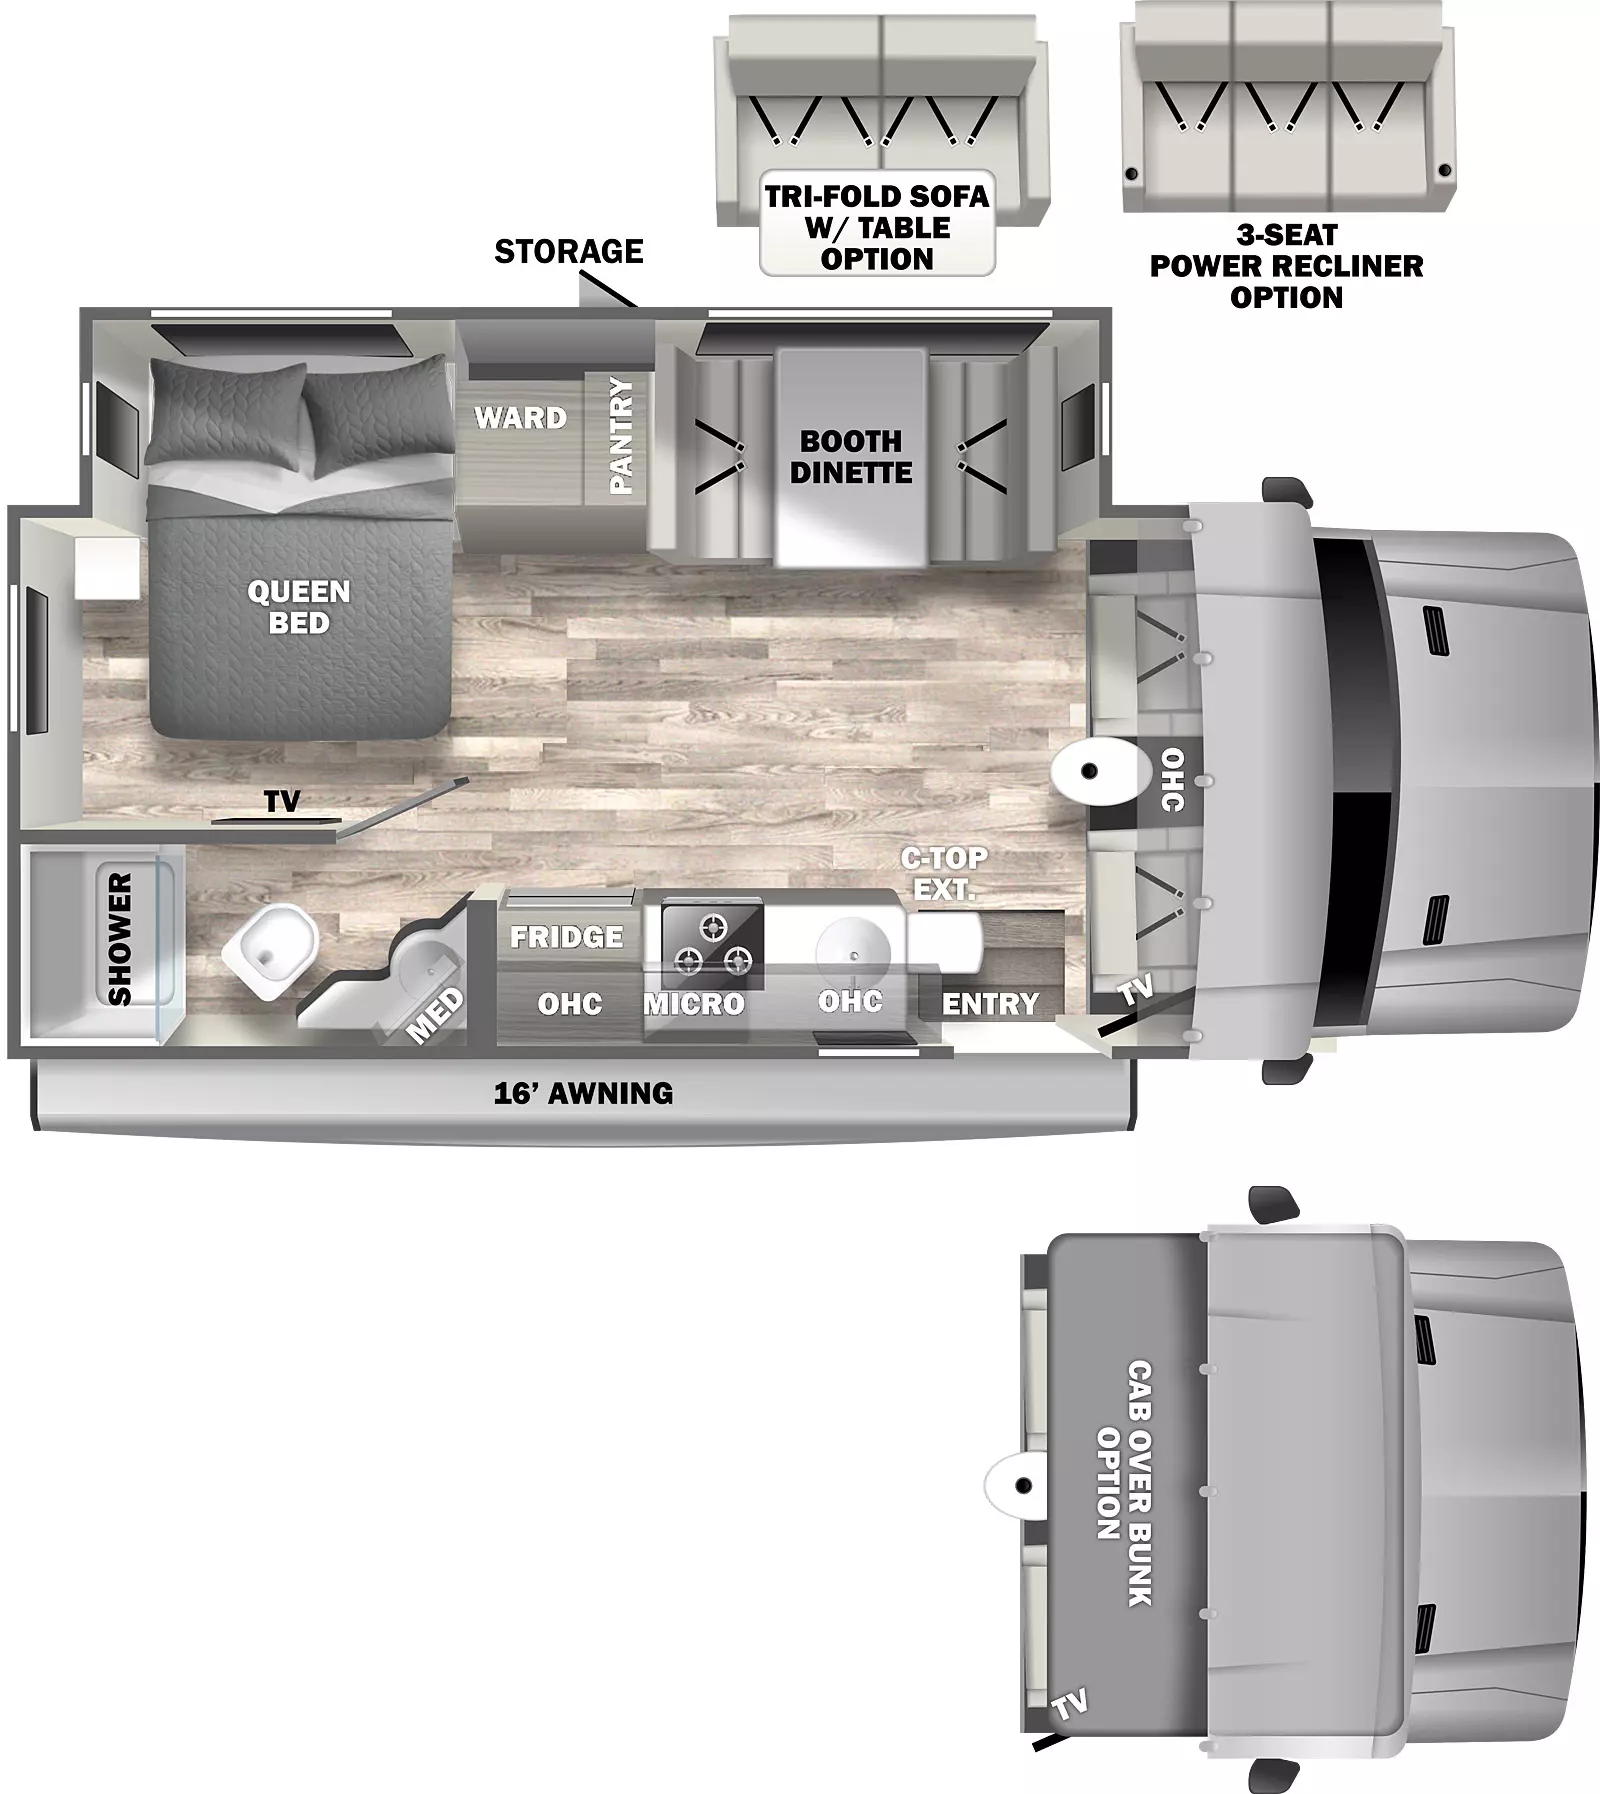 The 24FW has 1 full wall slide out on off-door side, one entry door, 16' awning on door side.  Interior layout  front to back: Cab overhead cabinets, tv on door-side, off-door side full wall slide out; living area with booth dinette, pantry, wardrobe, queen bed.  Door side kitchen with single basin sink, microwave cabinet, cook top stove, overhead cabinet, refrigerator, full bathroom.  Options; cab-over bunk, tri-fold sofa with table or 3 seat power recliner in place of booth dinette.